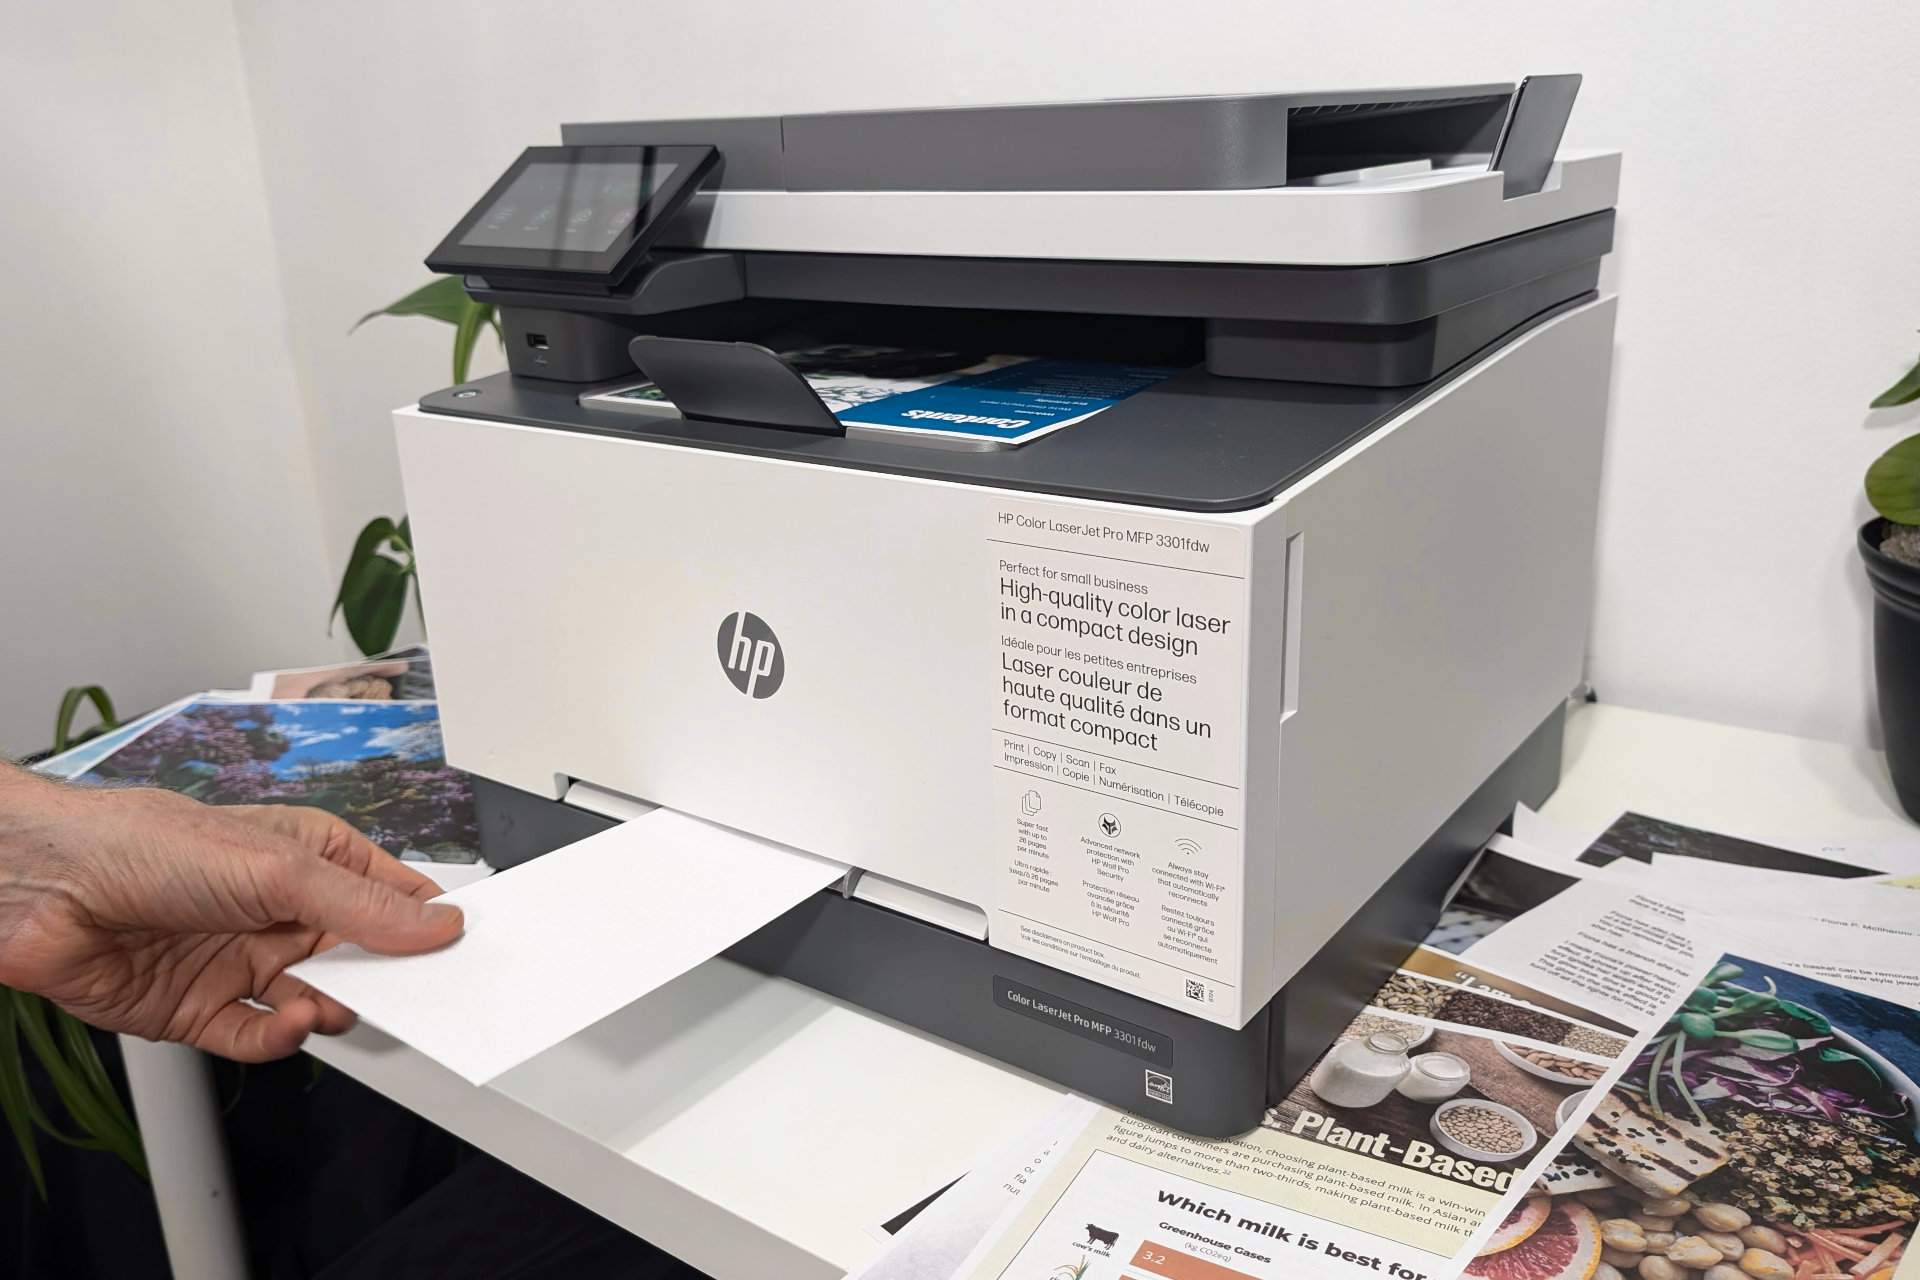 The HP Color LaserJet Pro MFP 3301fdw can print envelopes from my phone, a surprisingly rare talent.